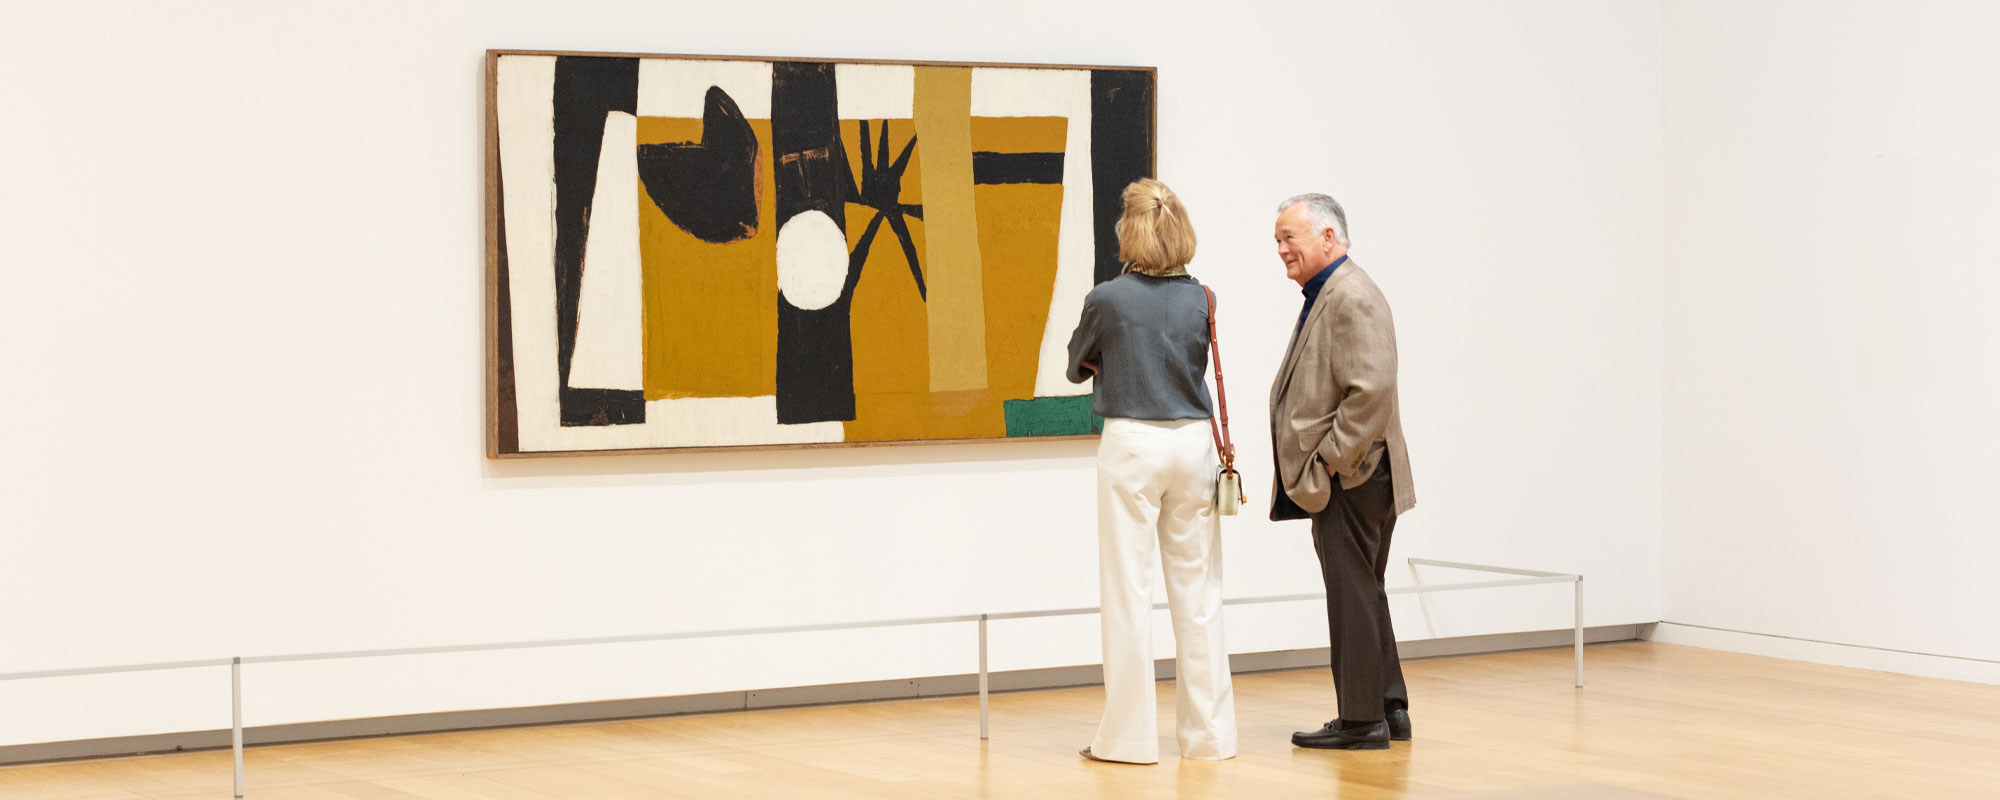 Supporting Circles members at the opening of Robert Motherwell: Pure Painting.